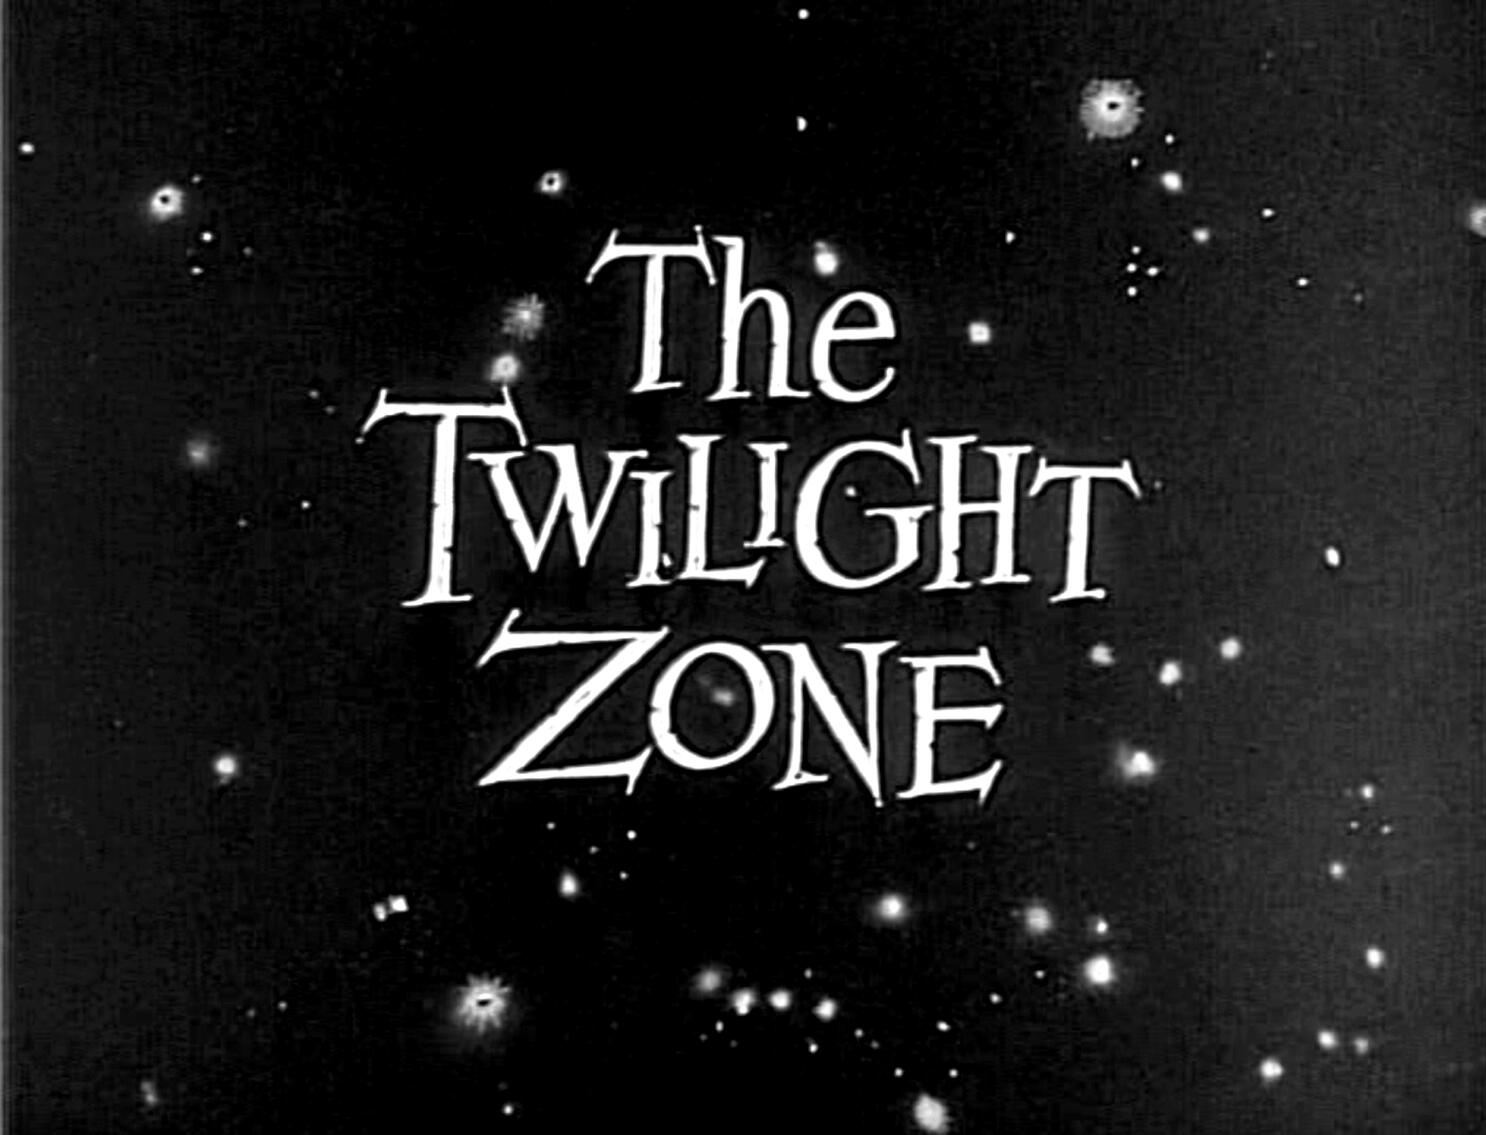 Op-Ed: A chilling pandemic message from 'The Twilight Zone' - Los